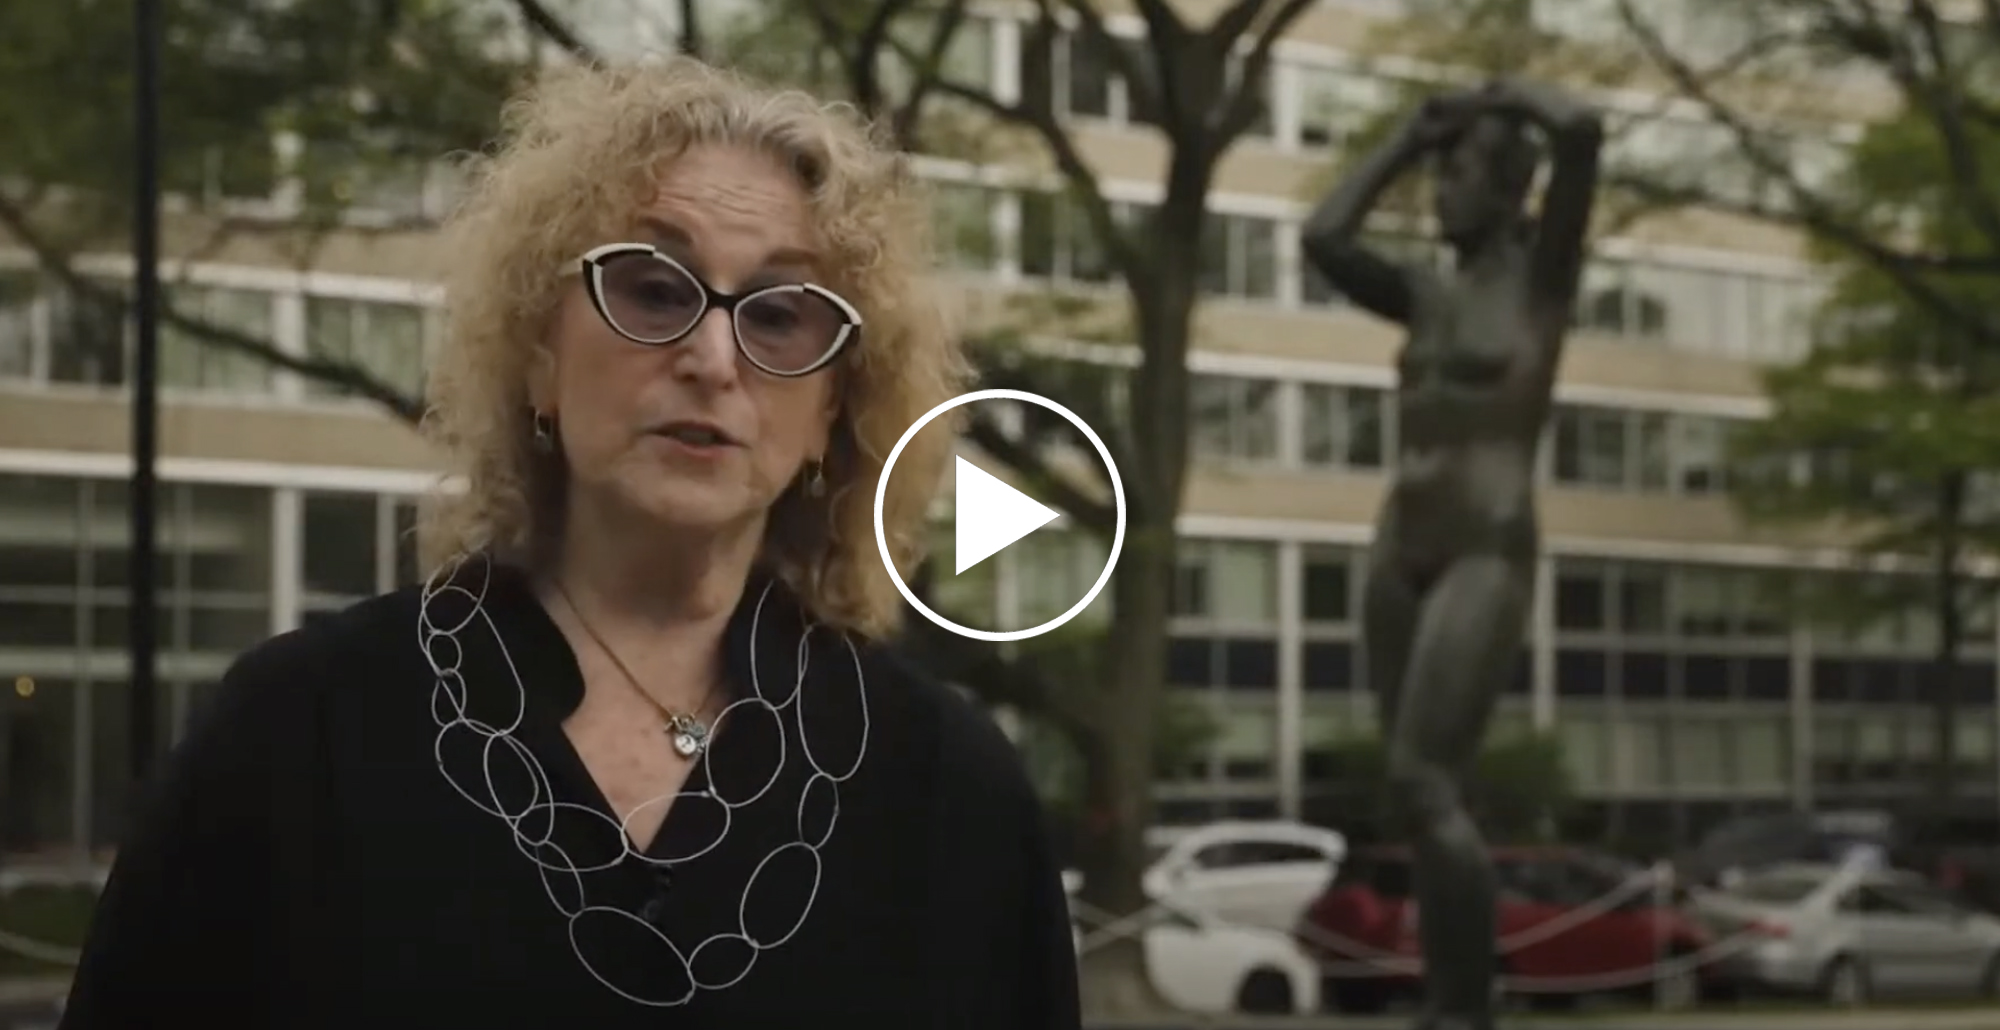 aPA's Executive Director on site with the Maja sculpture, giving a talk about the artwork's history. Penny has blonde curly hair, black and white cat eye glasses, a black top and a necklace of thin white circles